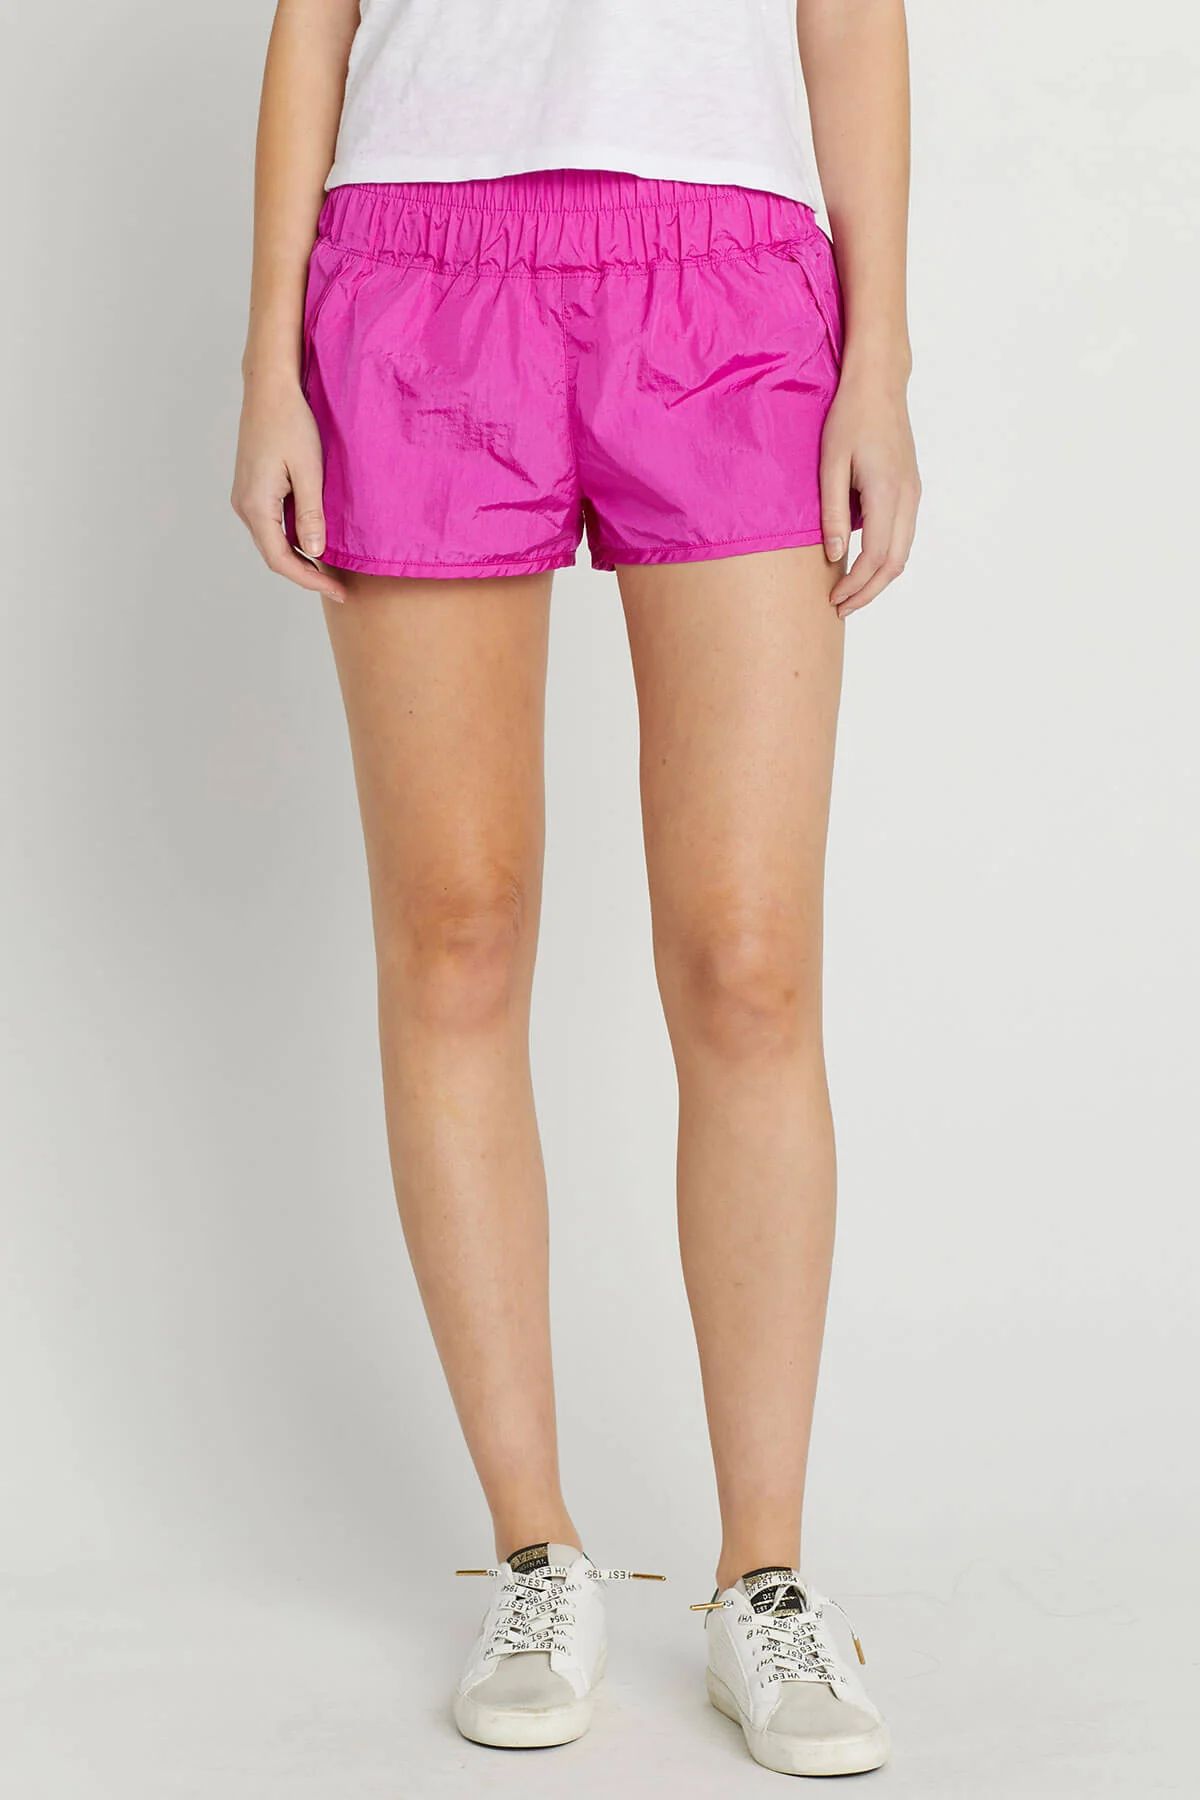 Free People The Way Home Shorts | Social Threads